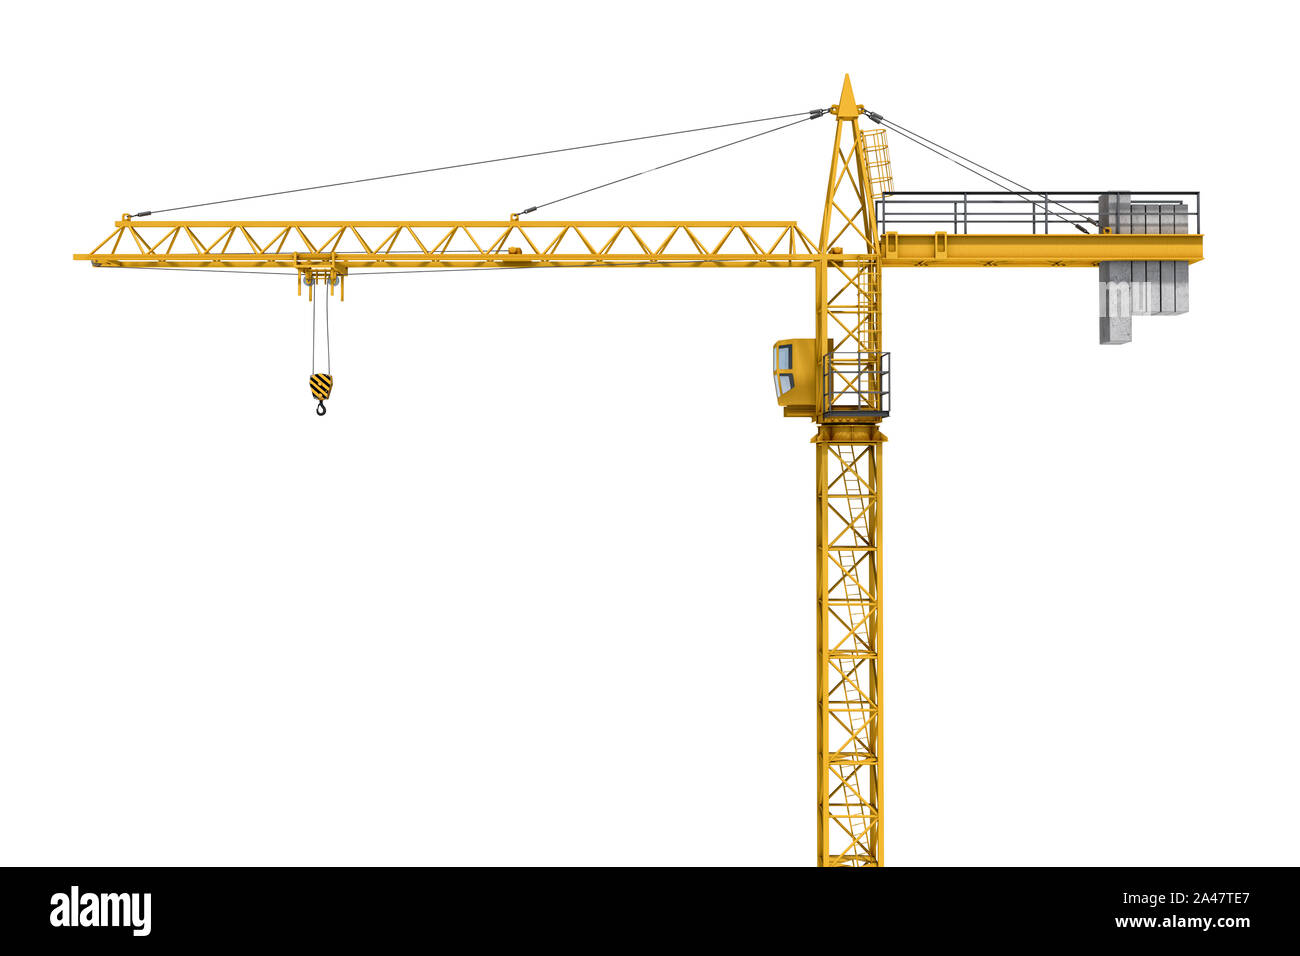 3D rendering of a yellow construction crane isolated on a white background. Construction. Tower crane. Modern form of balance crane. Type of machine e Stock Photo